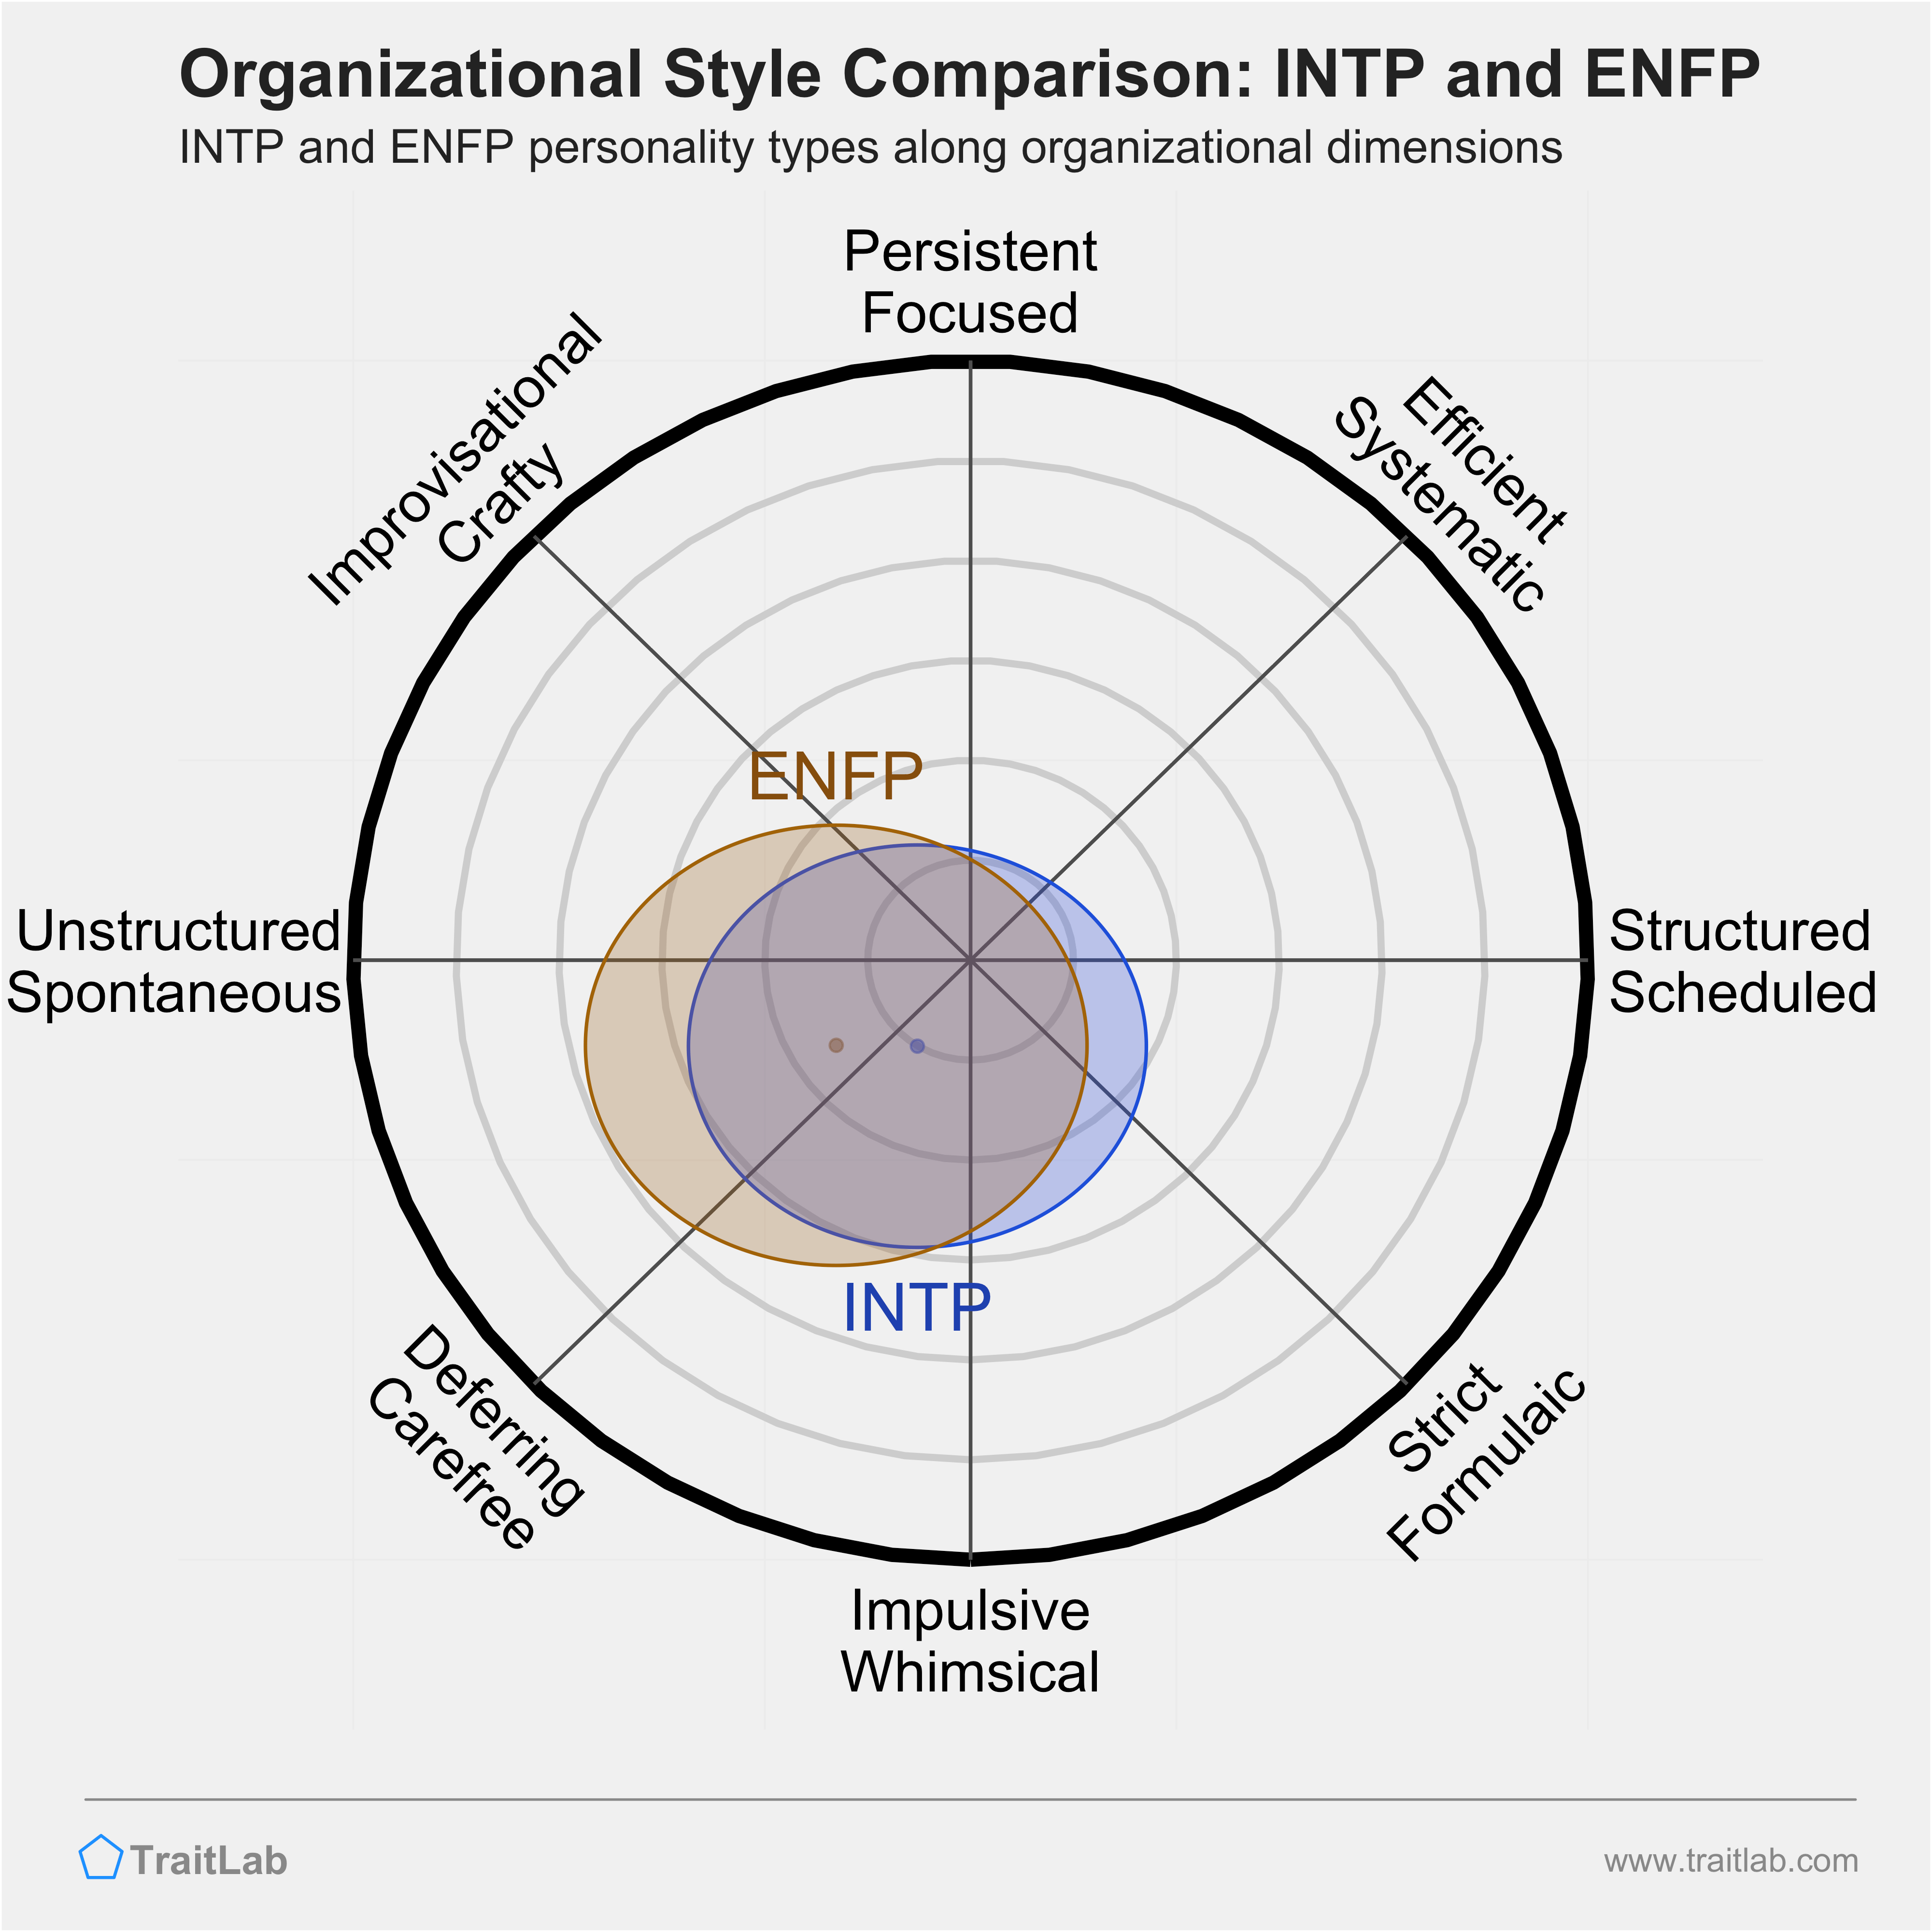 INTP and ENFP comparison across organizational dimensions